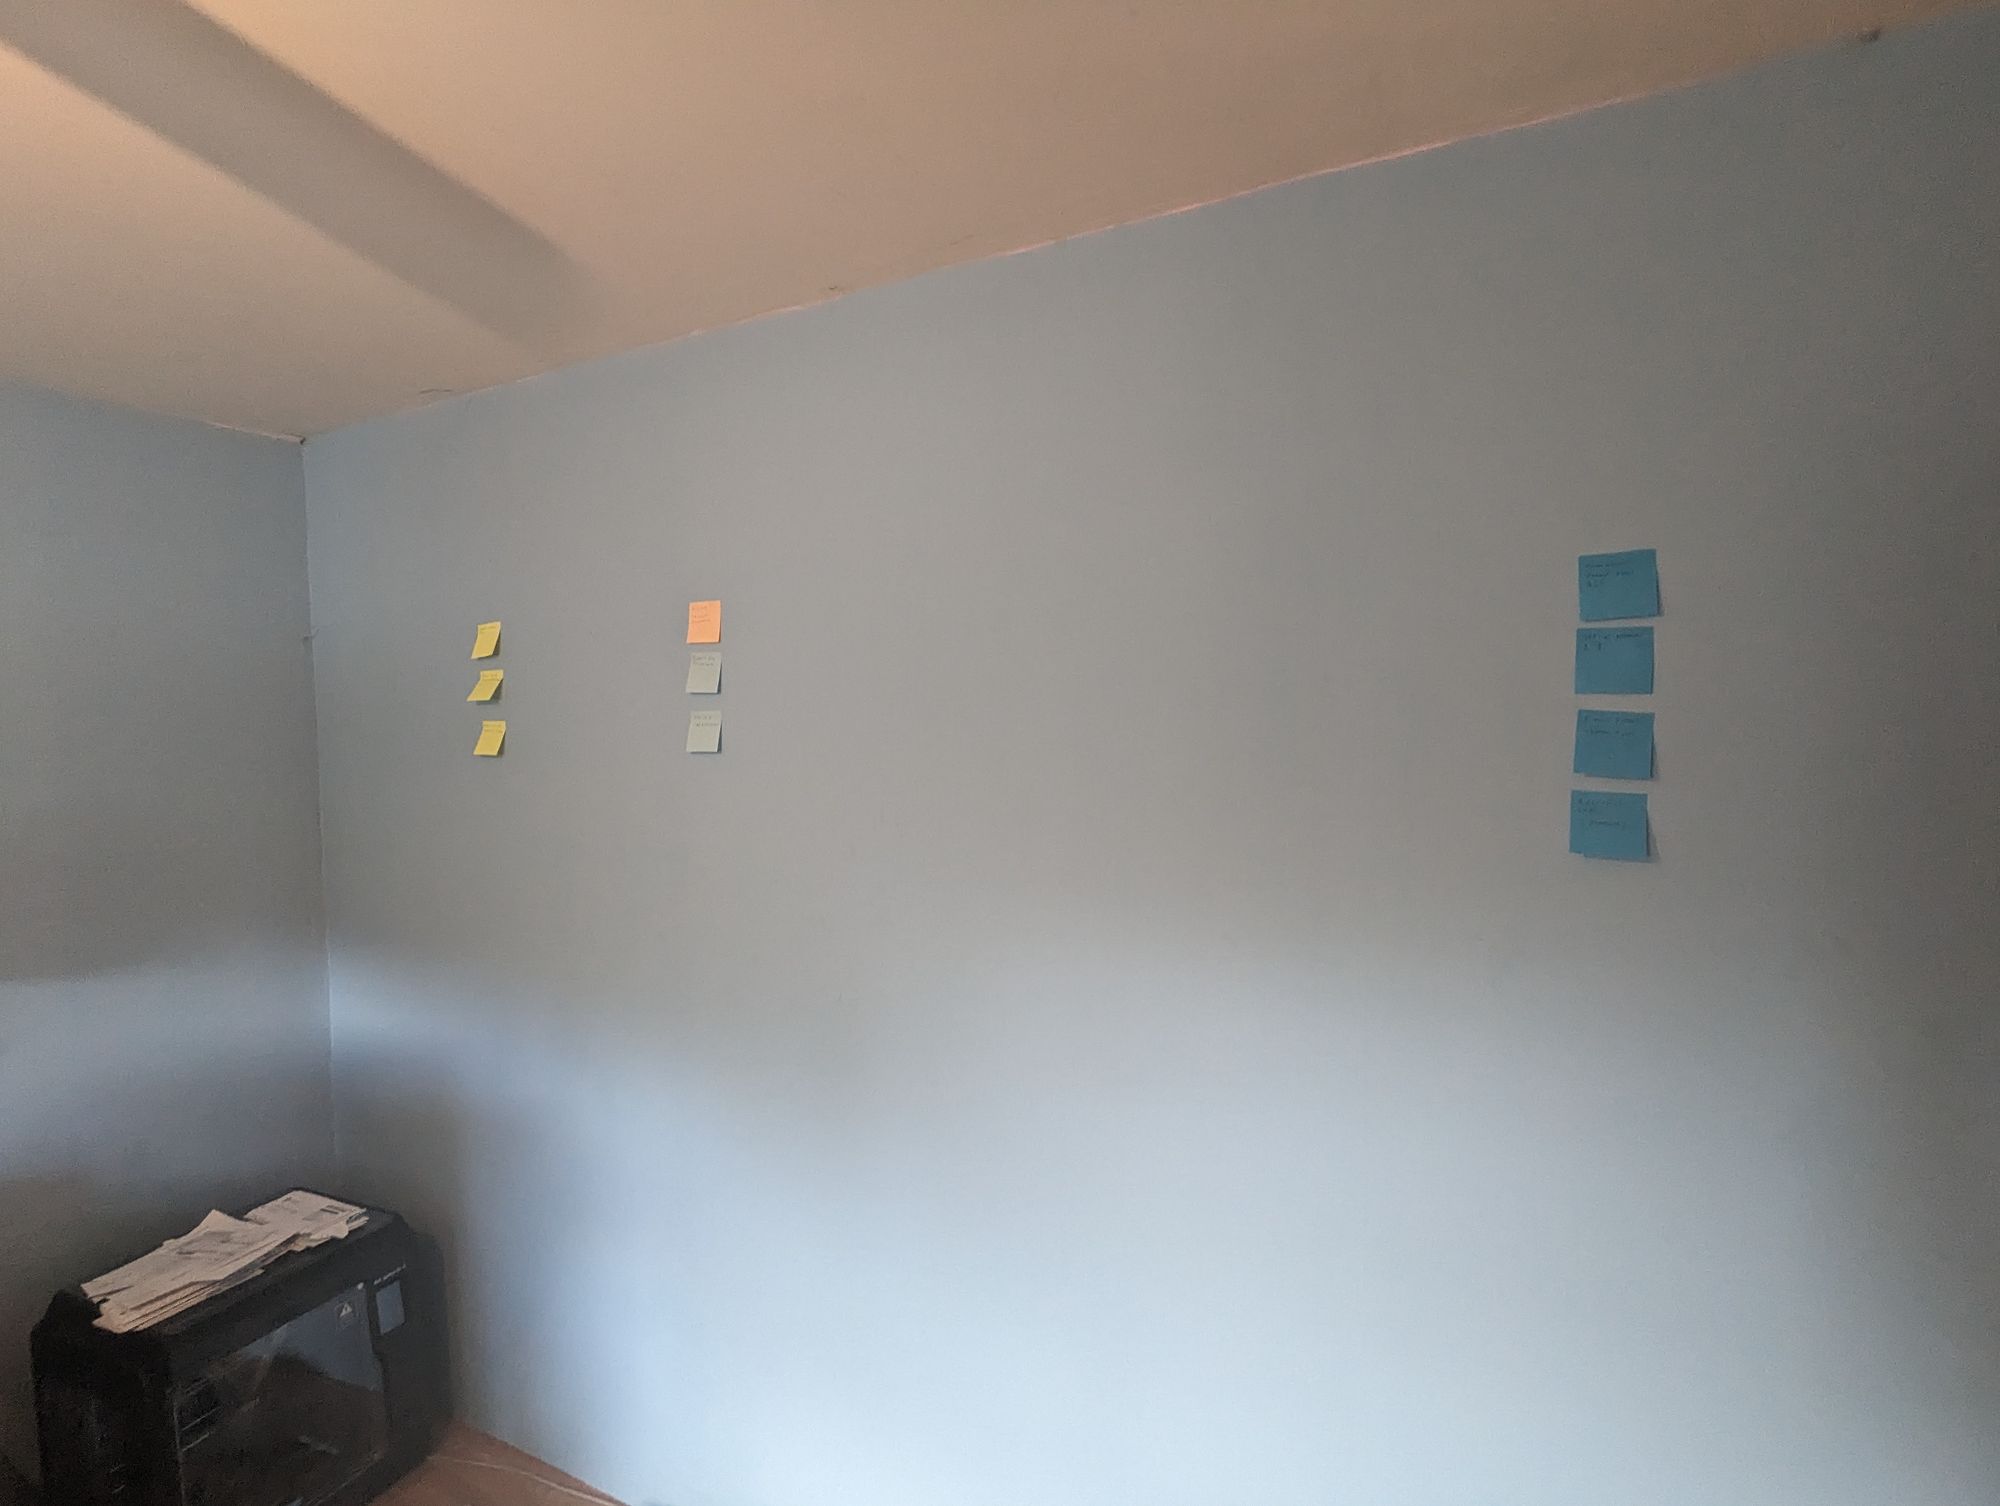 Post it notes stuck on a light blue wall